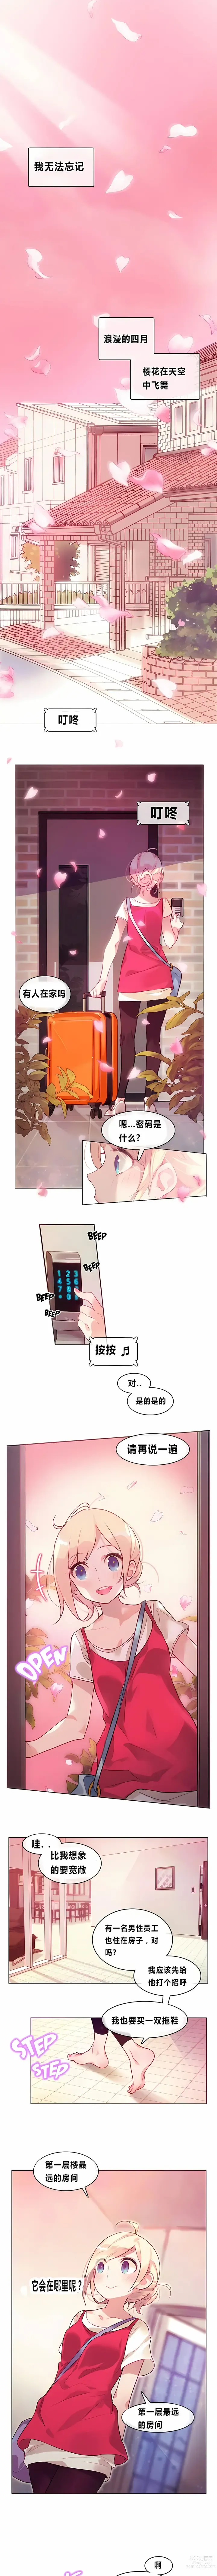 Page 2 of doujinshi A Pervert's Daily Life 第1-4季 1-144